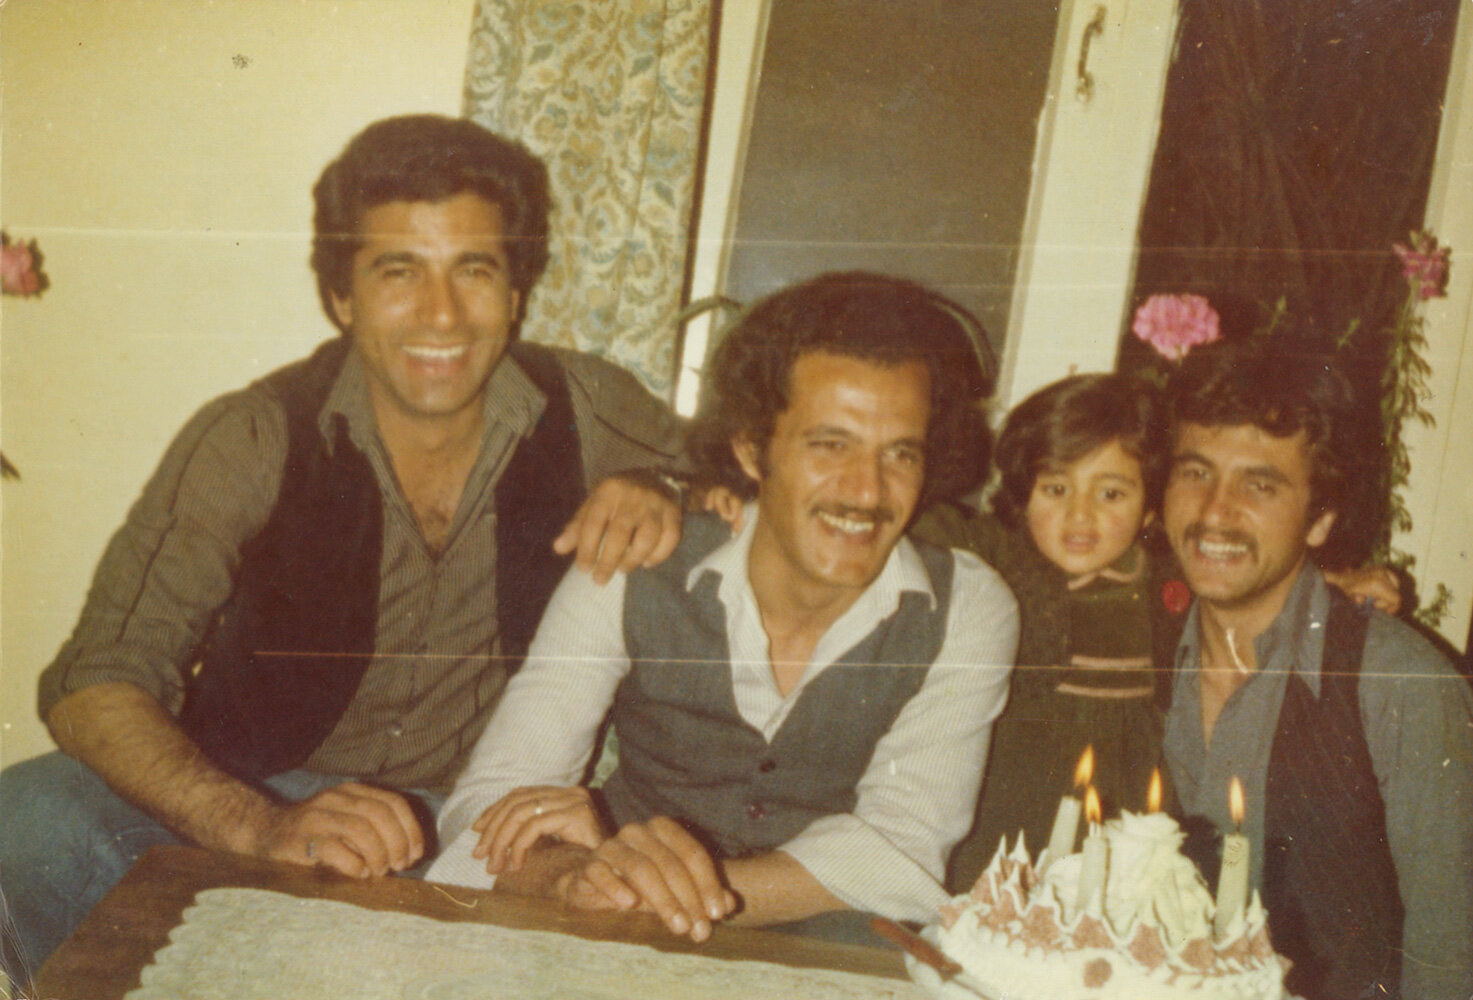 fatema-birthday-with-dad-on-her-right-and-two-uncles.jpg